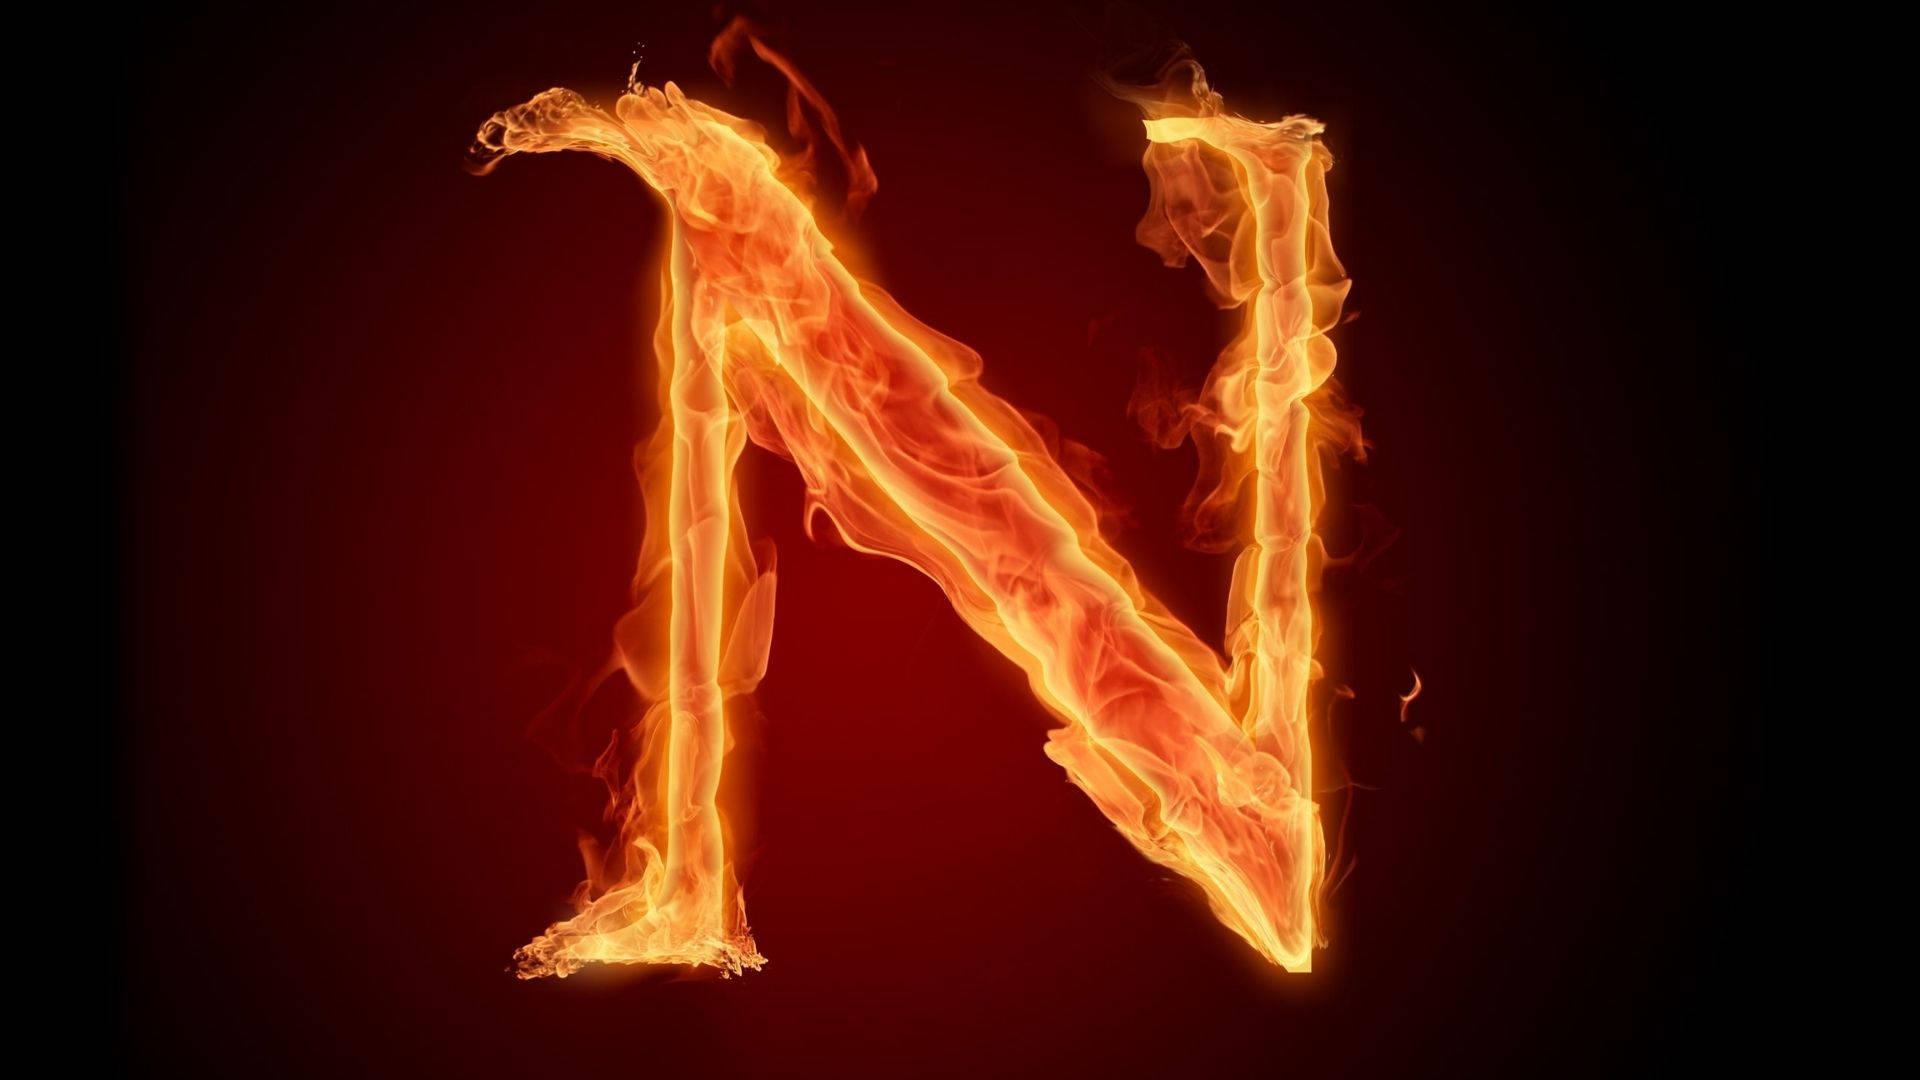 Mesmerizing Neon Letter 'n' From Alphabet Series